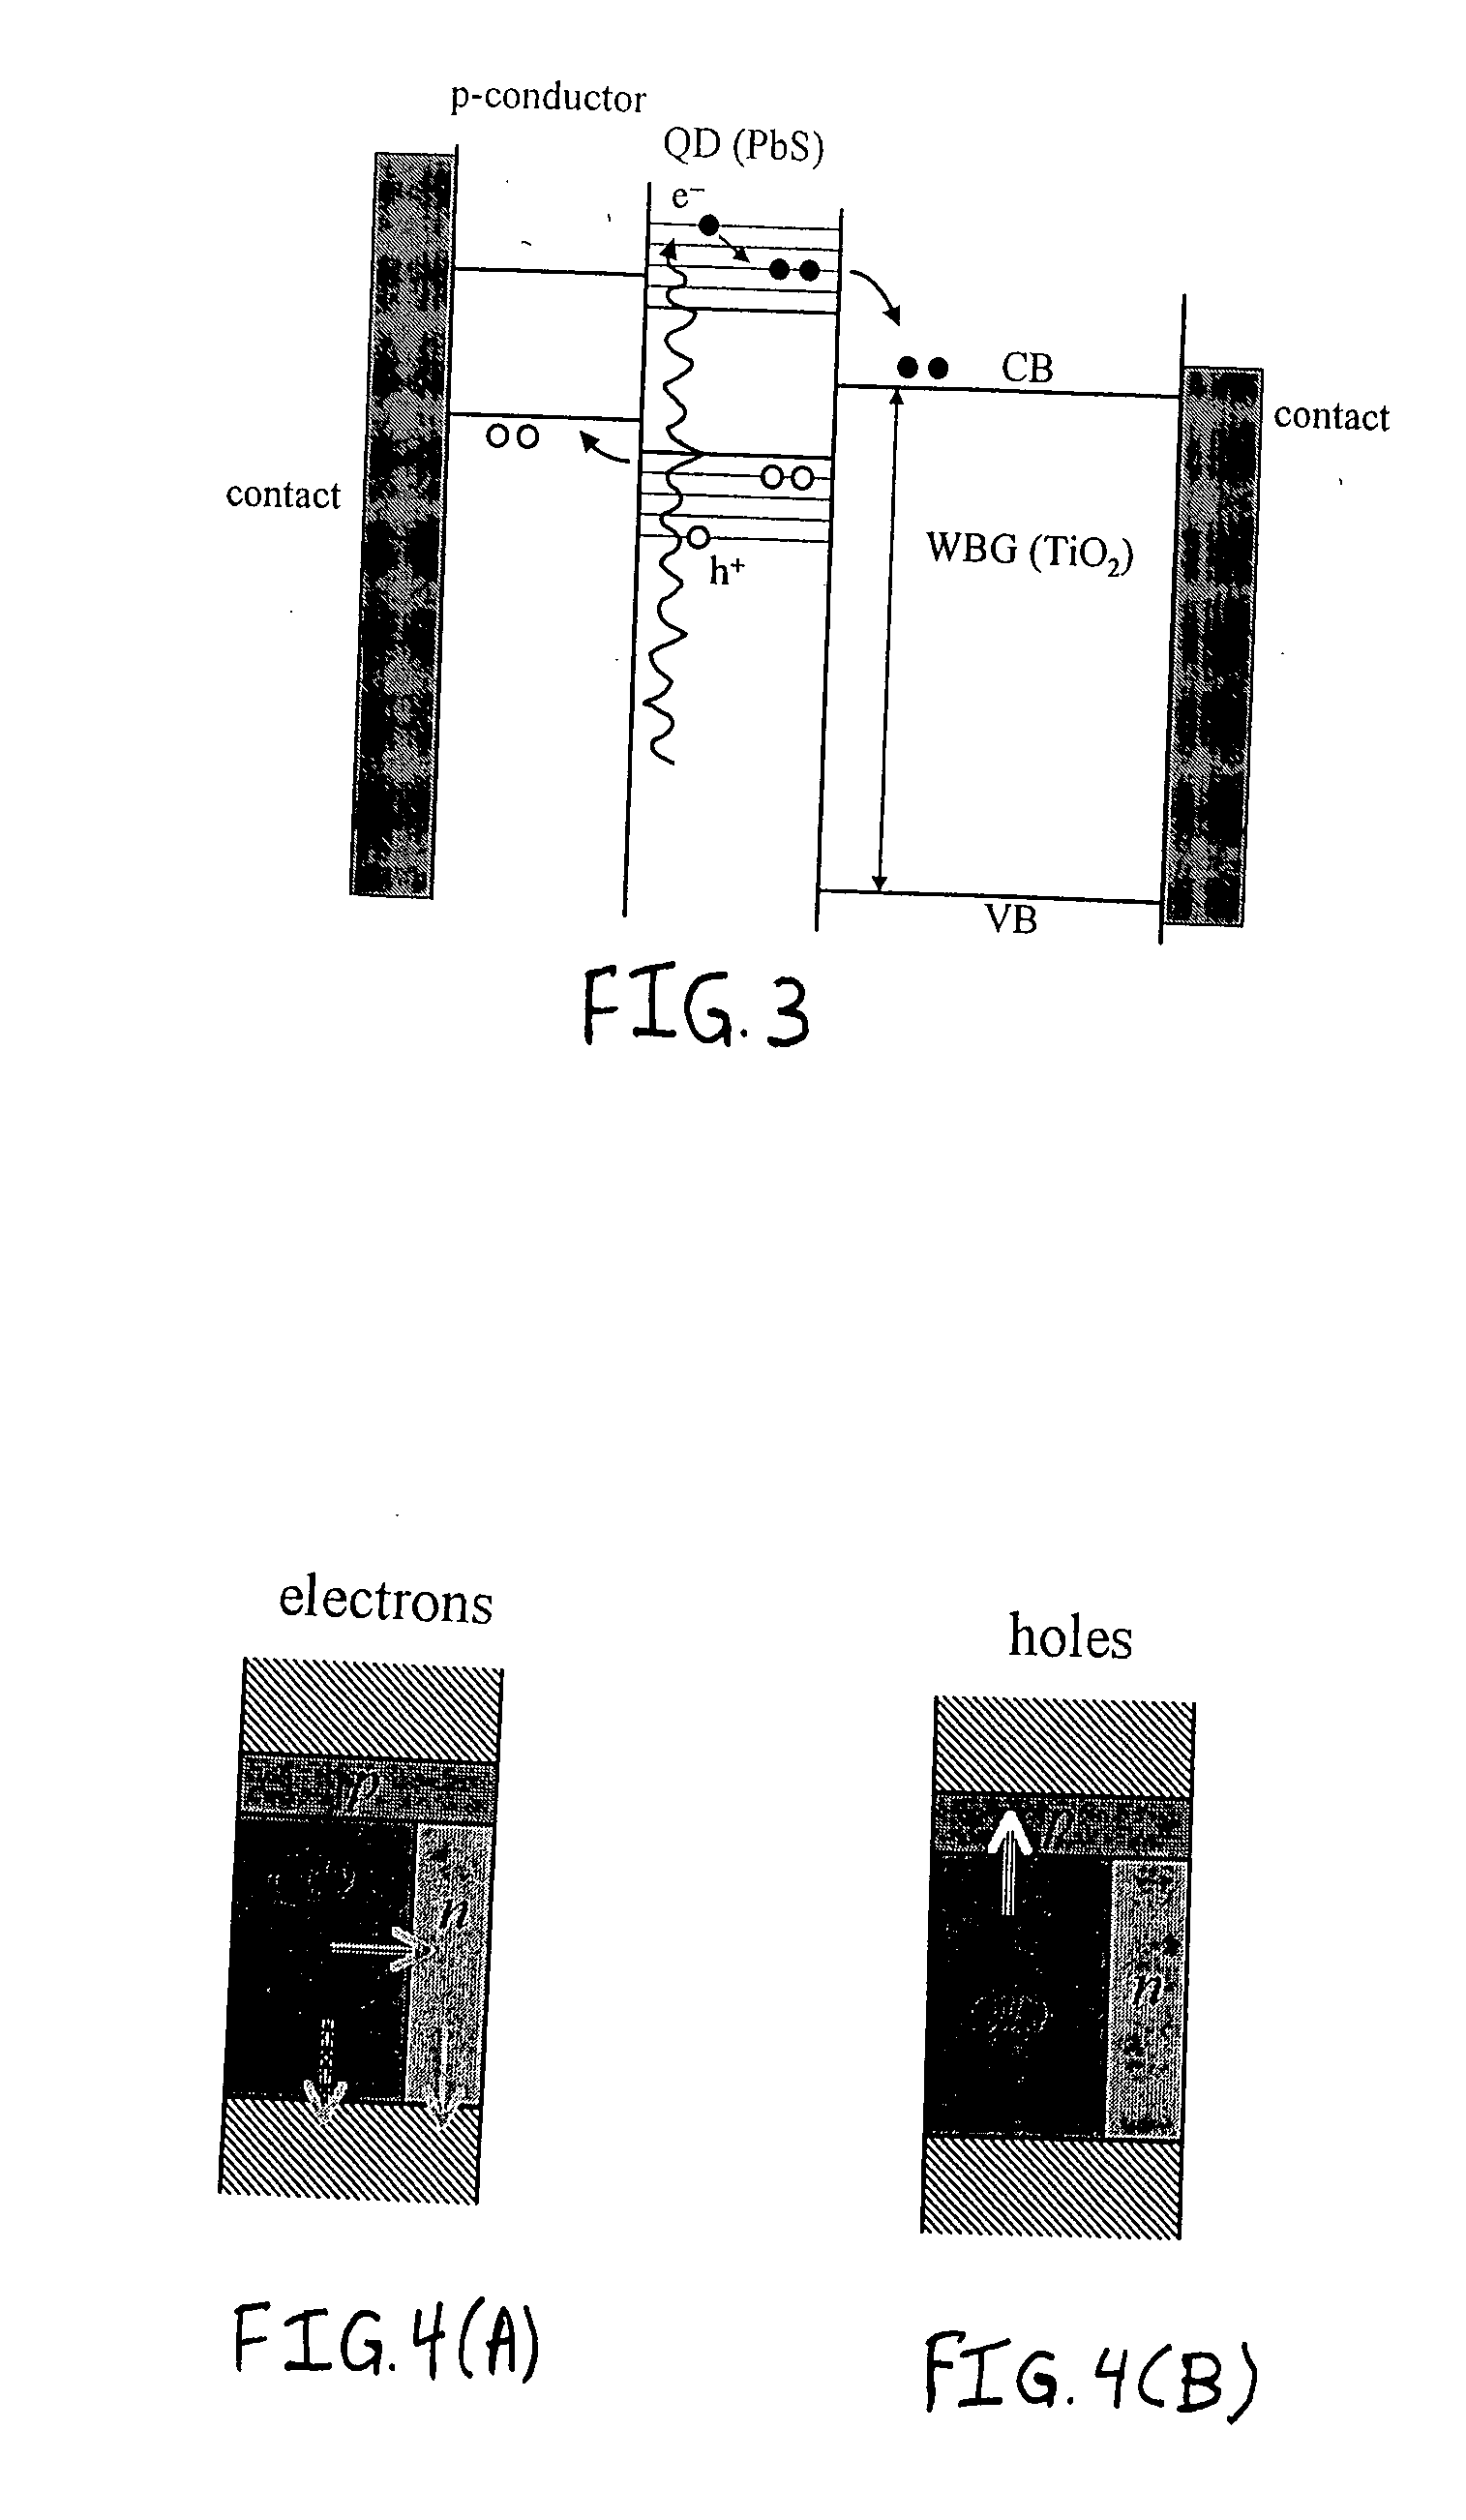 Quantum dot sensitized wide bandgap semiconductor photovoltaic devices & methods of fabricating same